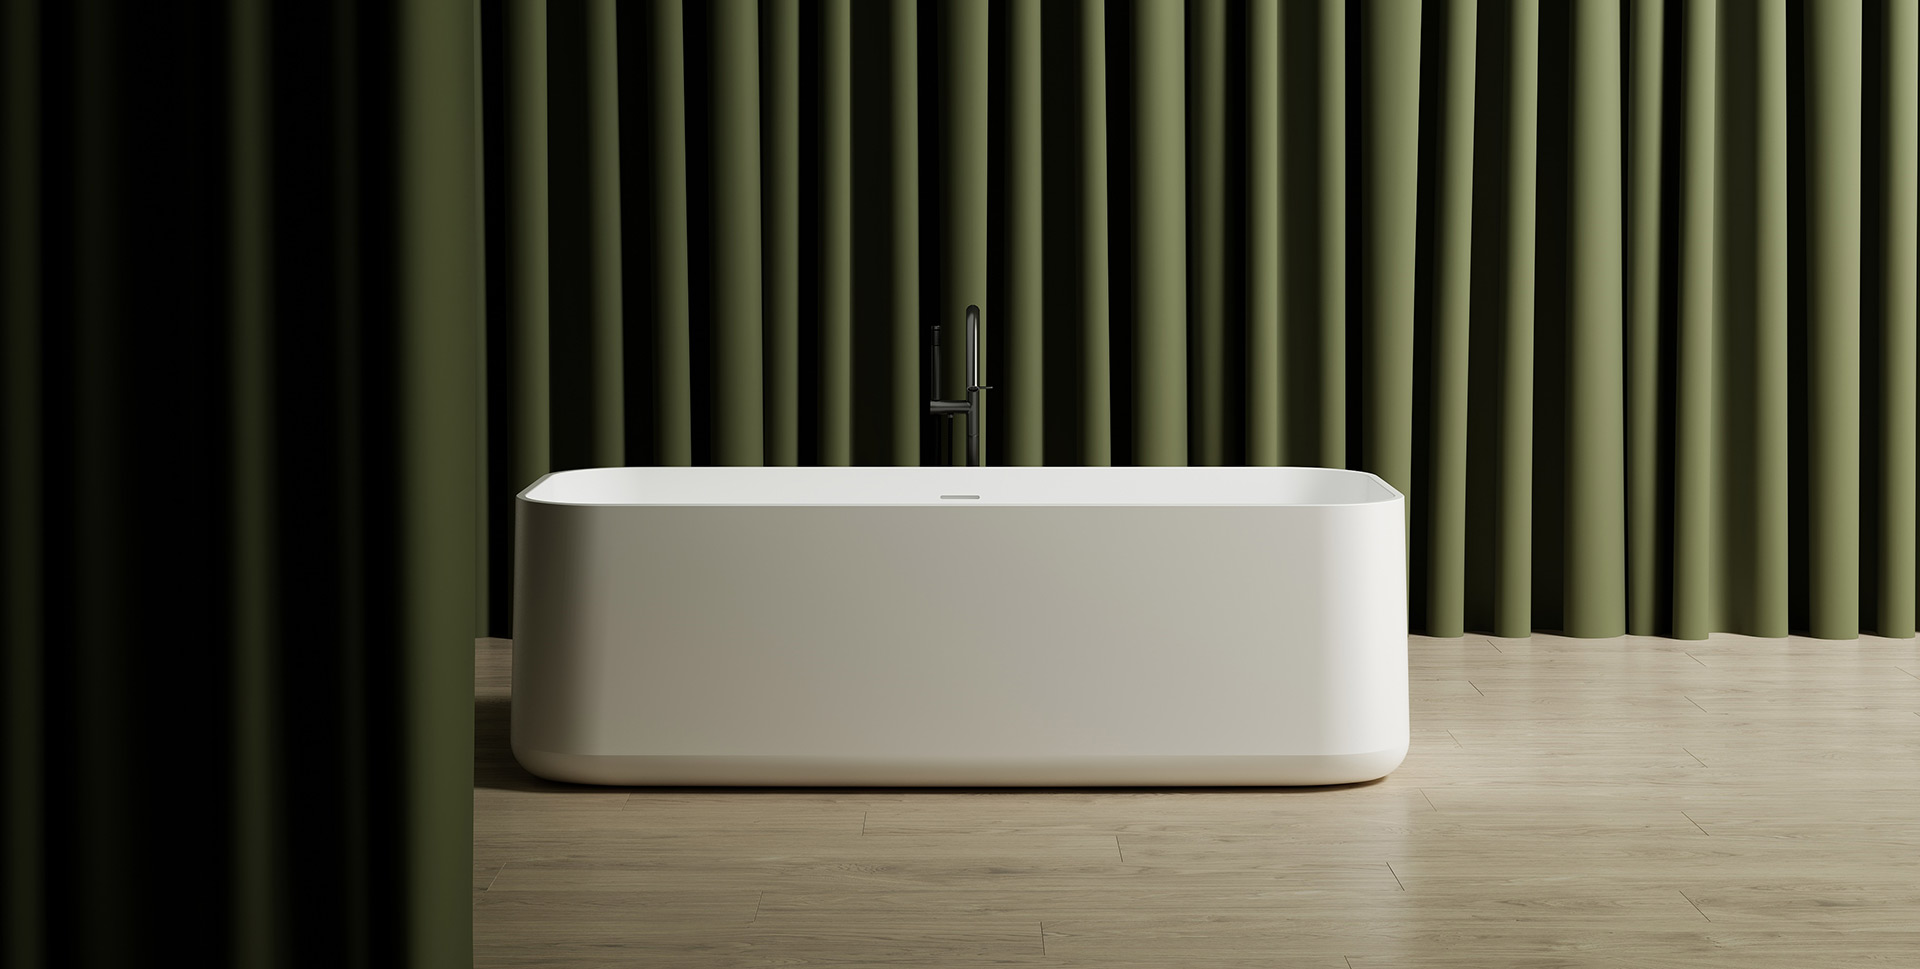 Solid surface bathtub-is your ideal bathtub type?